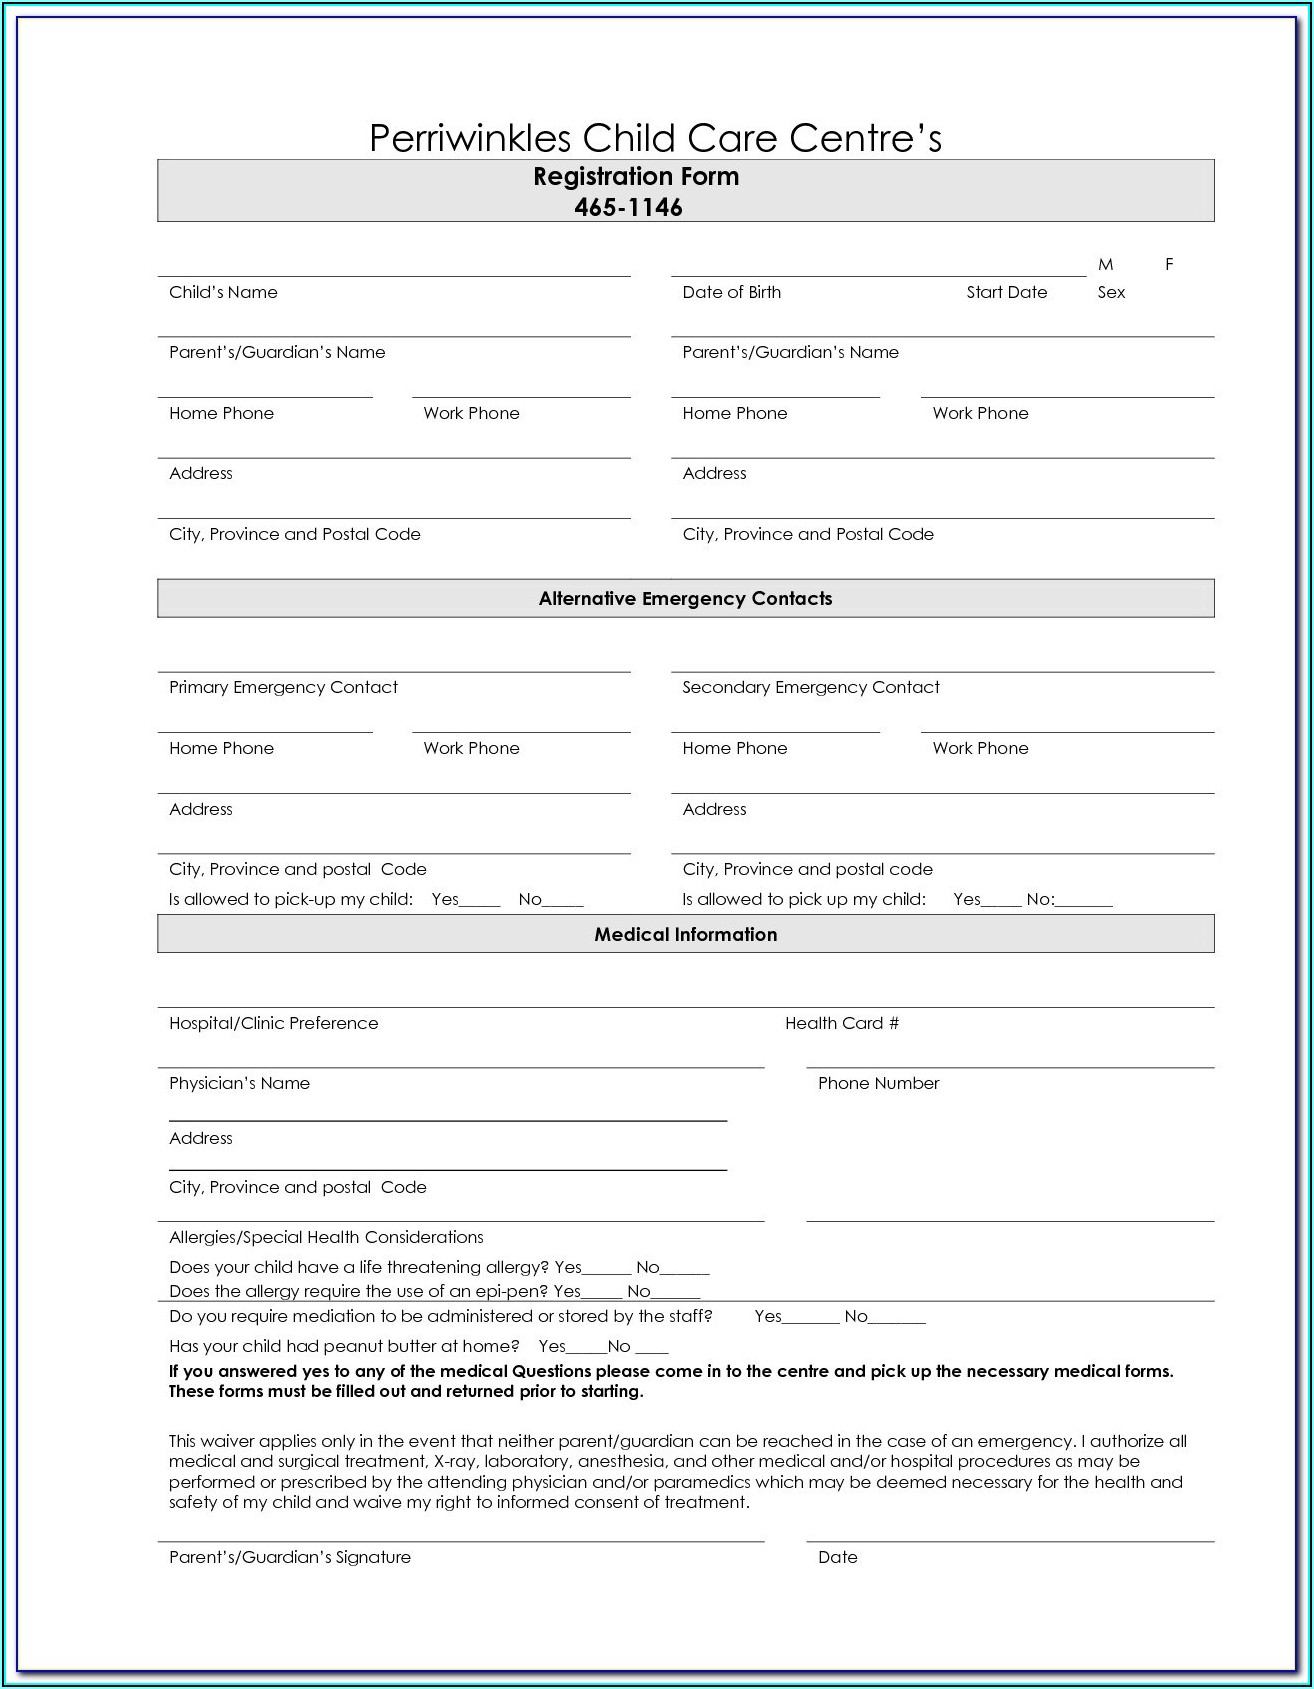 wisconsin-daycare-enrollment-forms-form-resume-examples-x42mweqykg